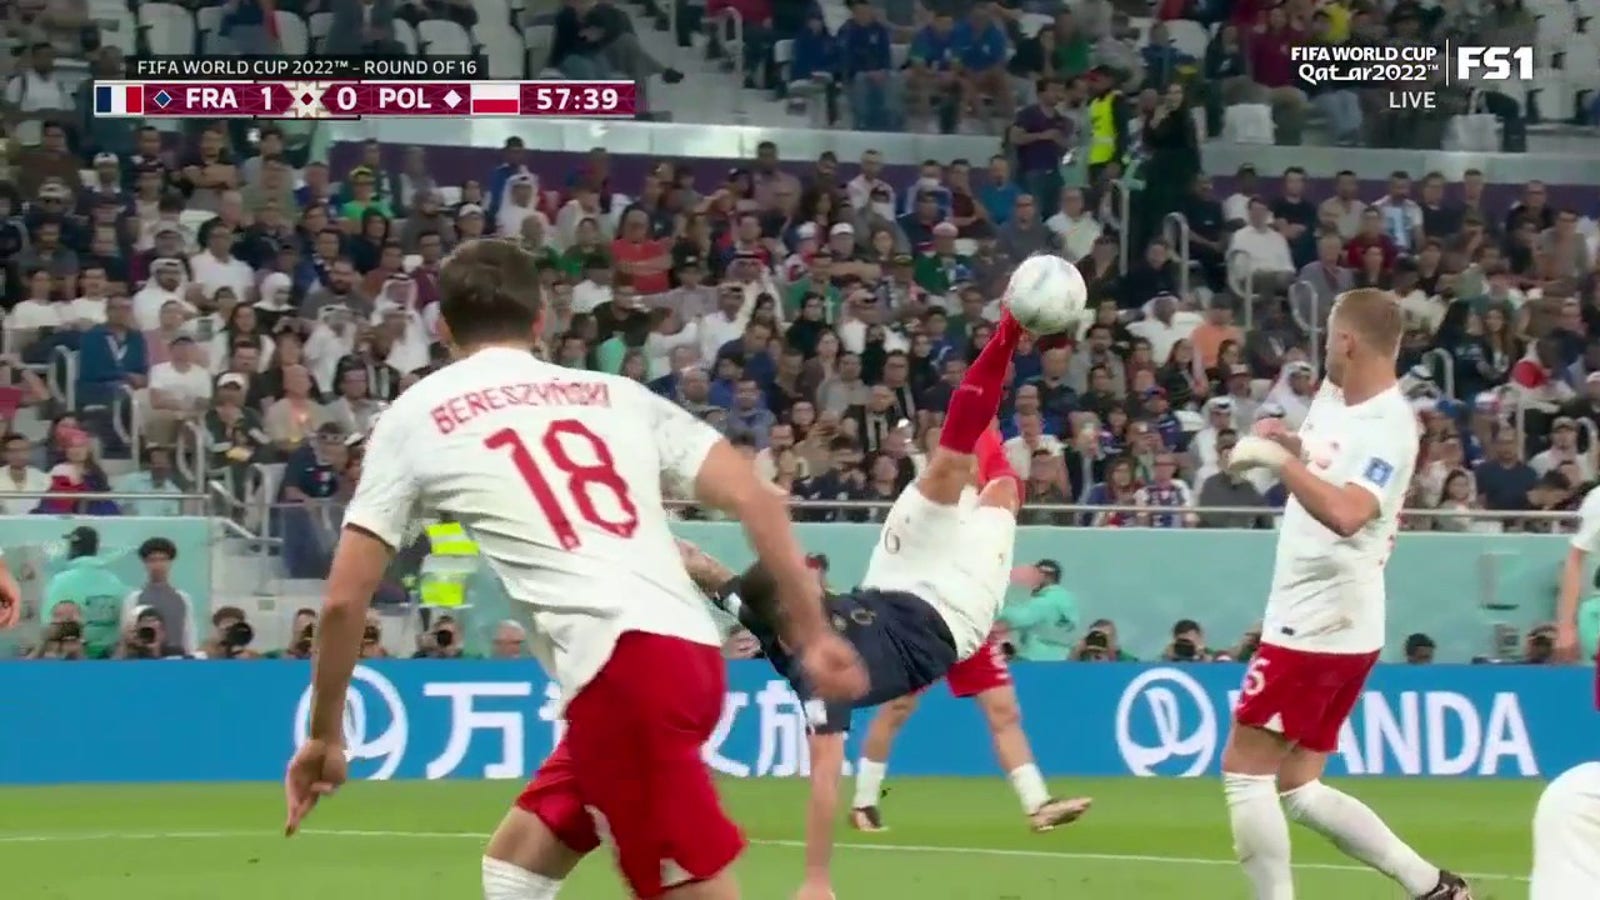 France's Olivier Giroud gets off bicycle kick after foul whistle 